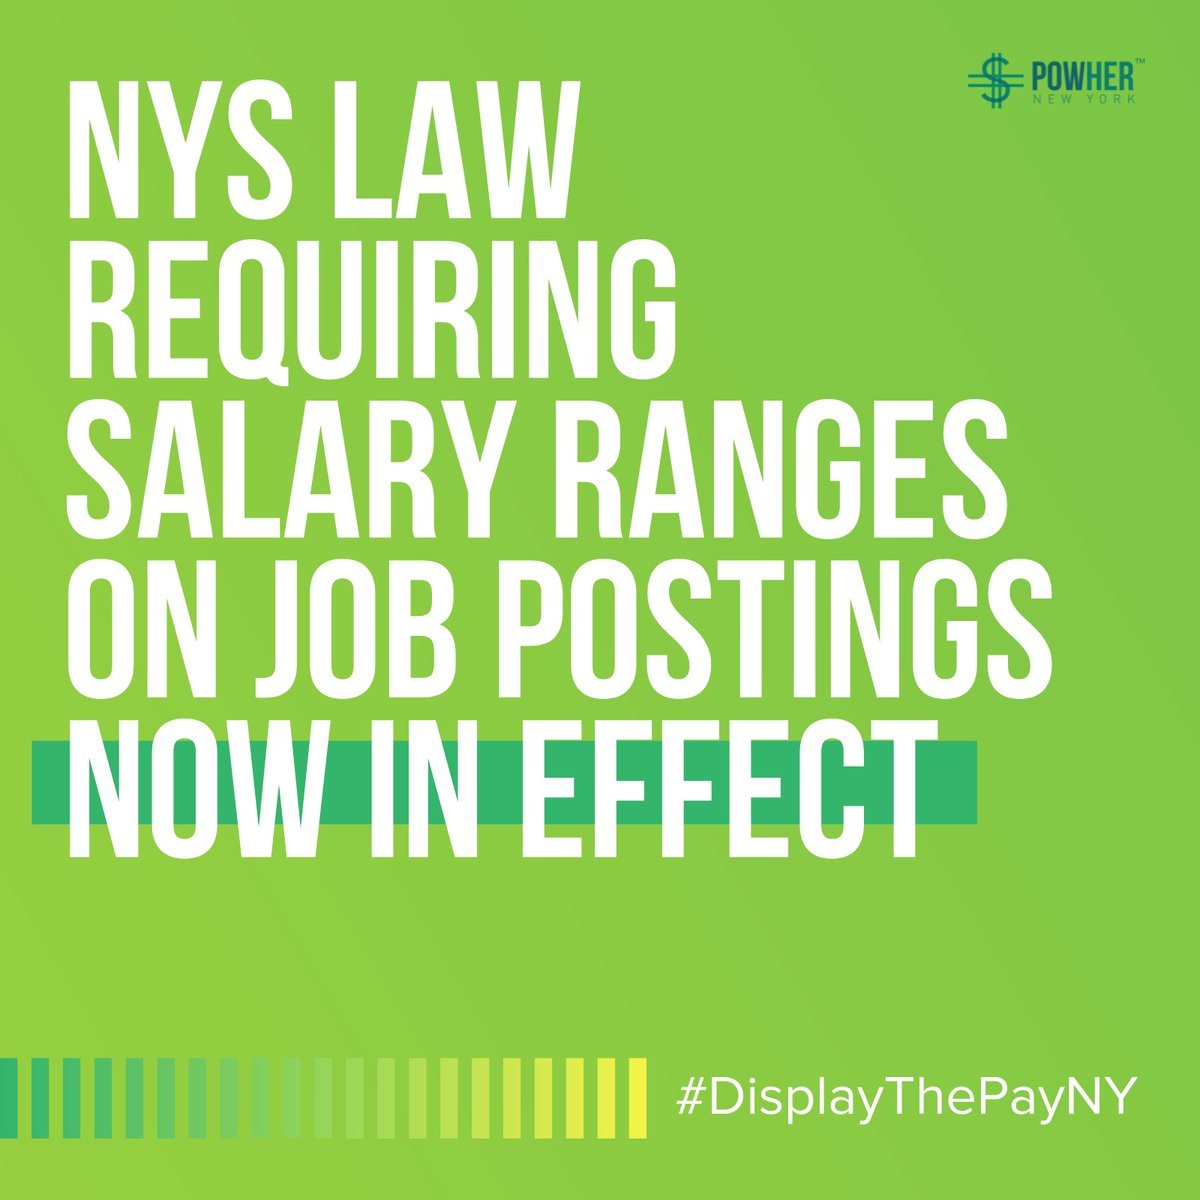 #DisplayThePayNY is a reality! Special thanks to Gov. Kathy Hochul; the sponsors, Senator Jessica Ramos & Assembly member LaToya Joyner, + Legal Momentum, NELA-NY, CWA Local 1180, & the Equal Pay Campaign Committee for their efforts & commitment to pay eq...
#EqualPayNY @PowherNY